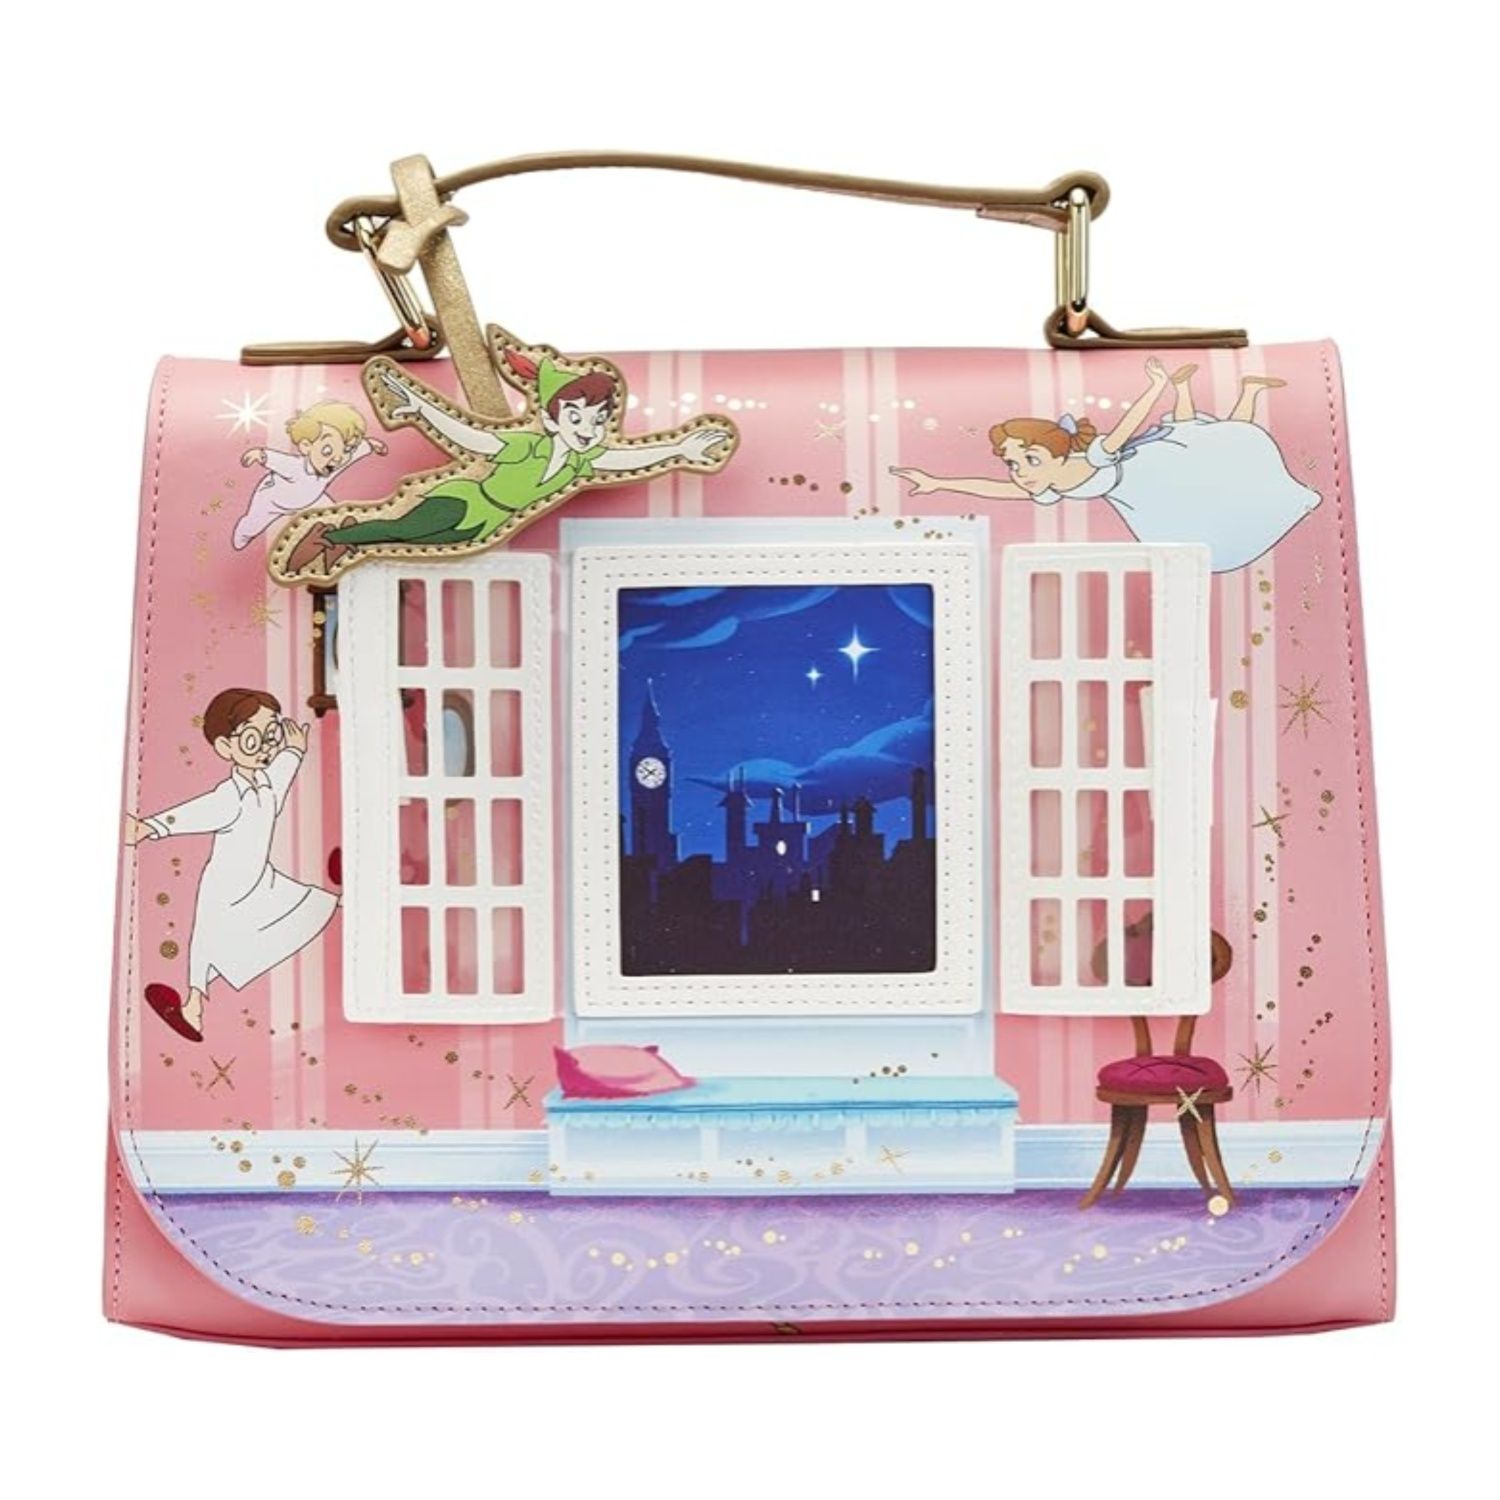 This purse looks like a nursery bedroom with Peter and the Darling children flying around.